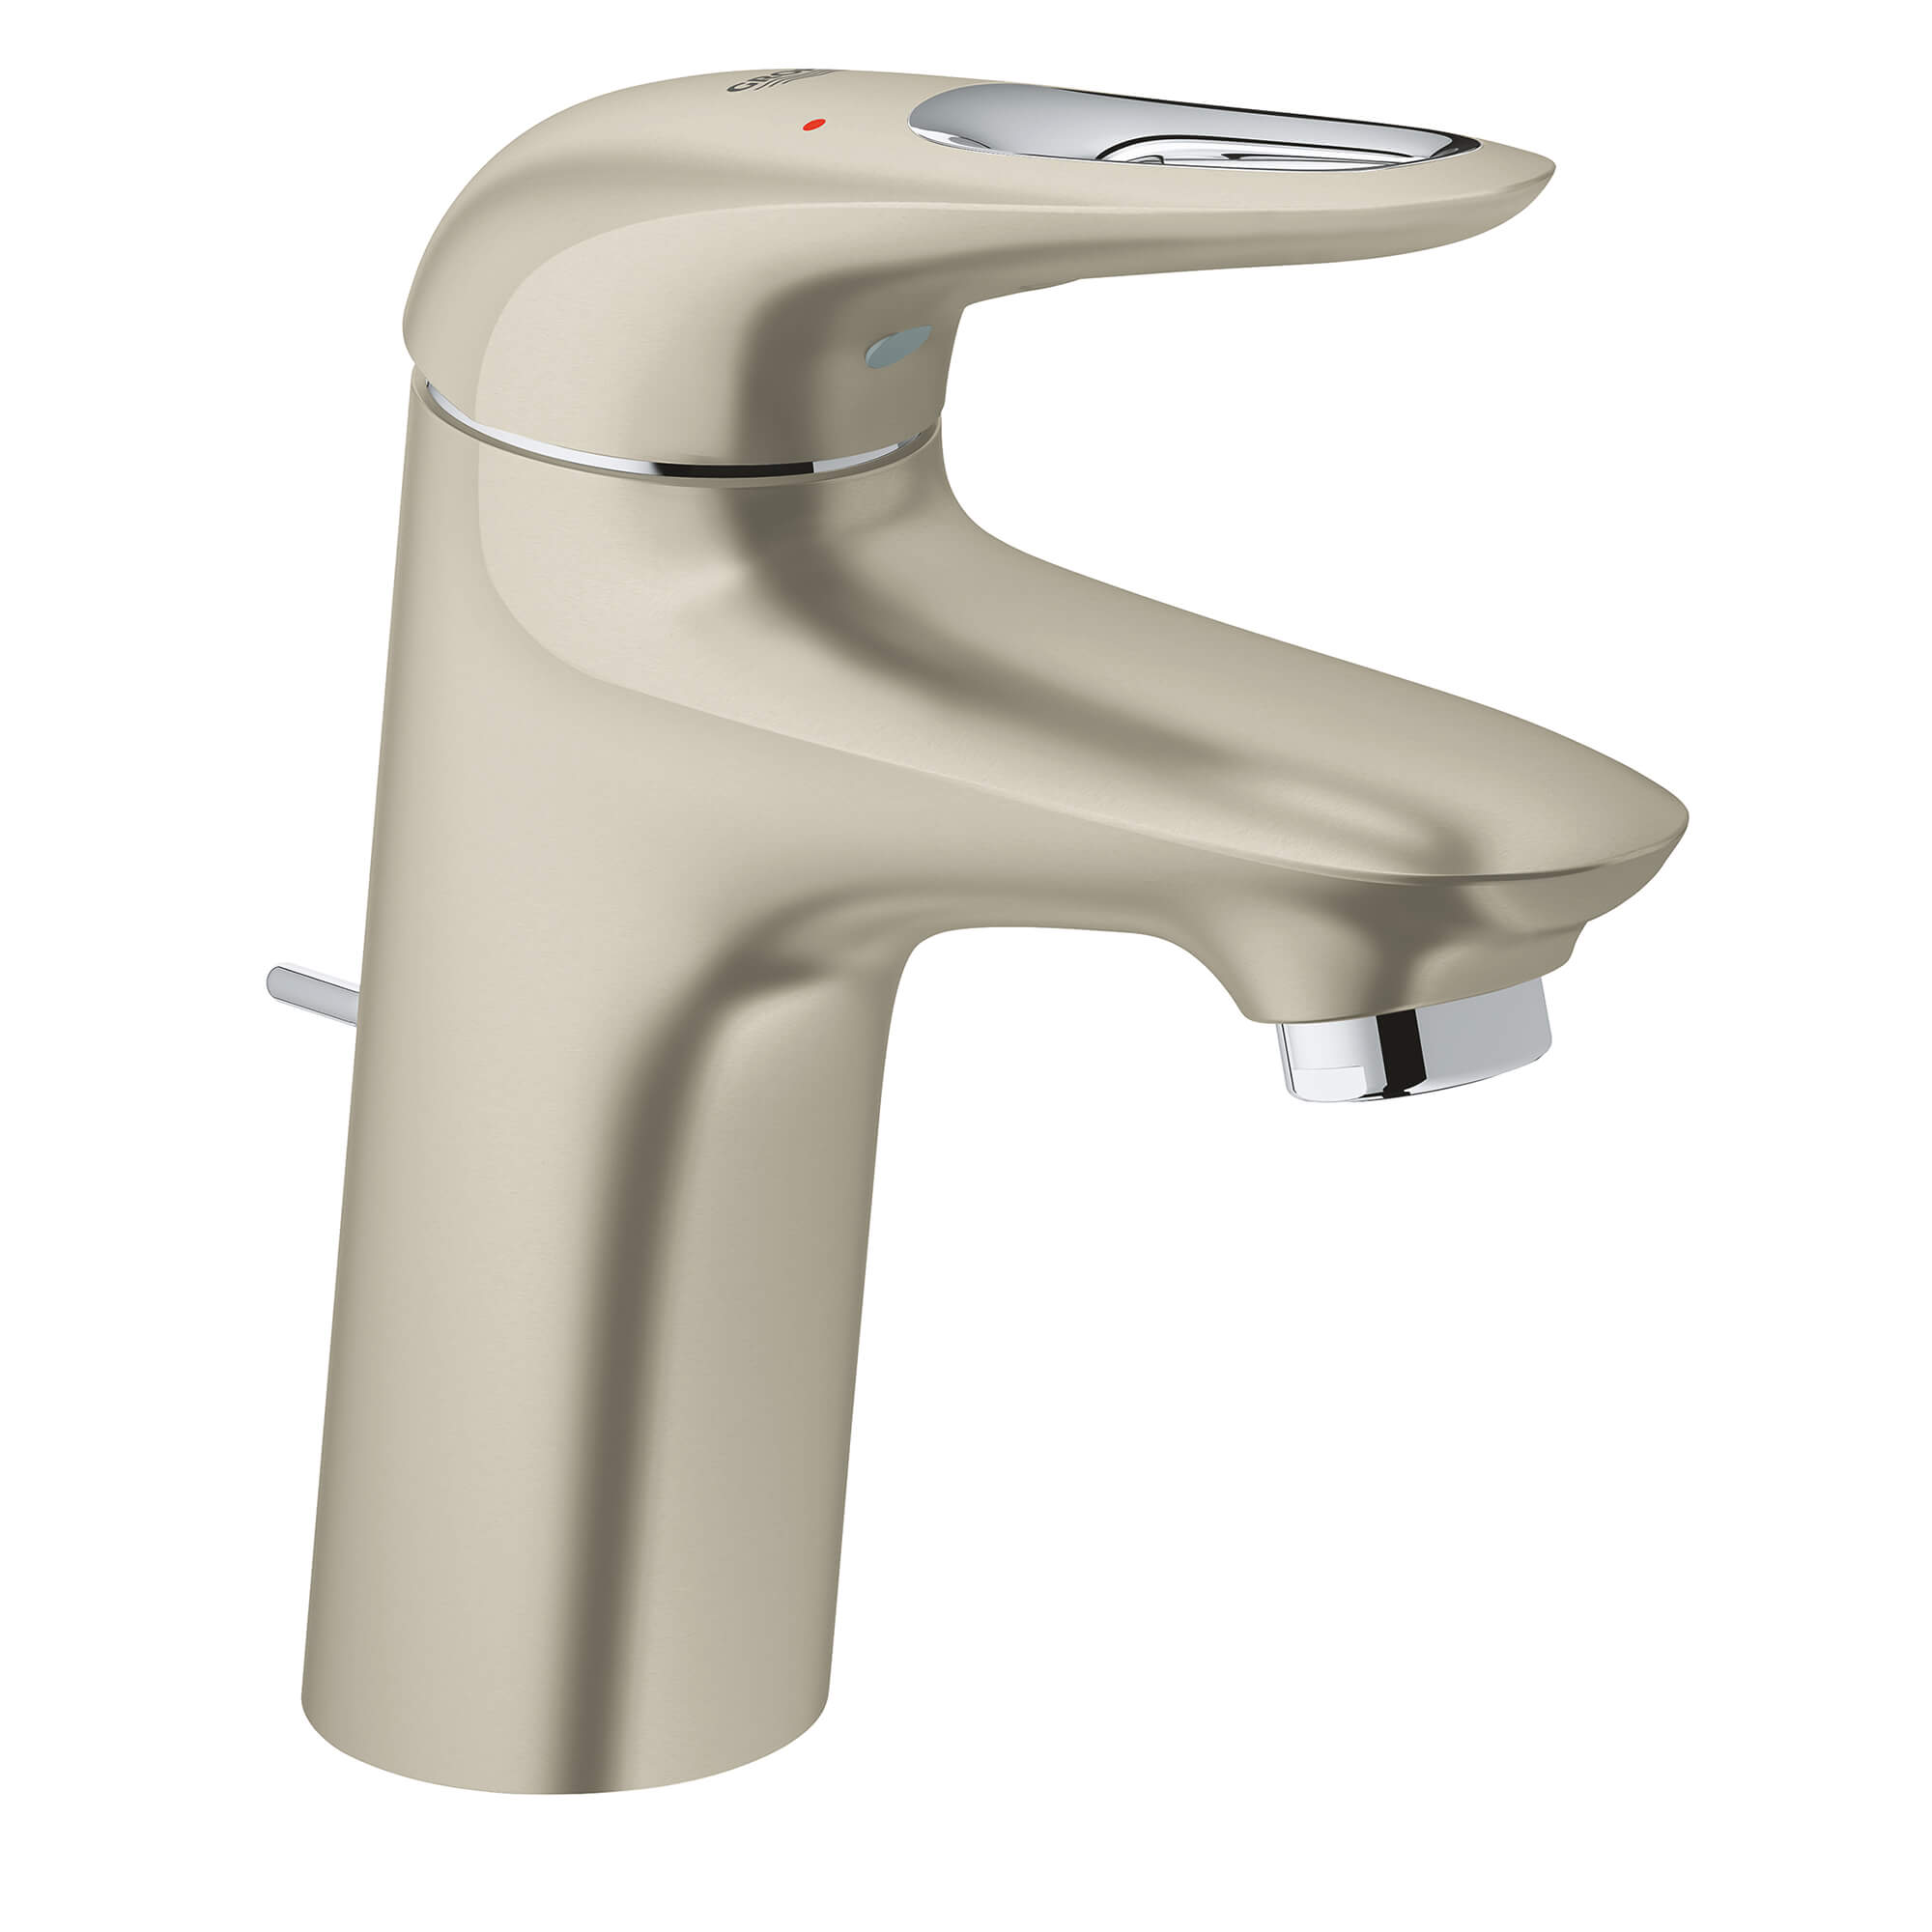 Eurostyle Robinet monotrou taille S GROHE BRUSHED NICKEL